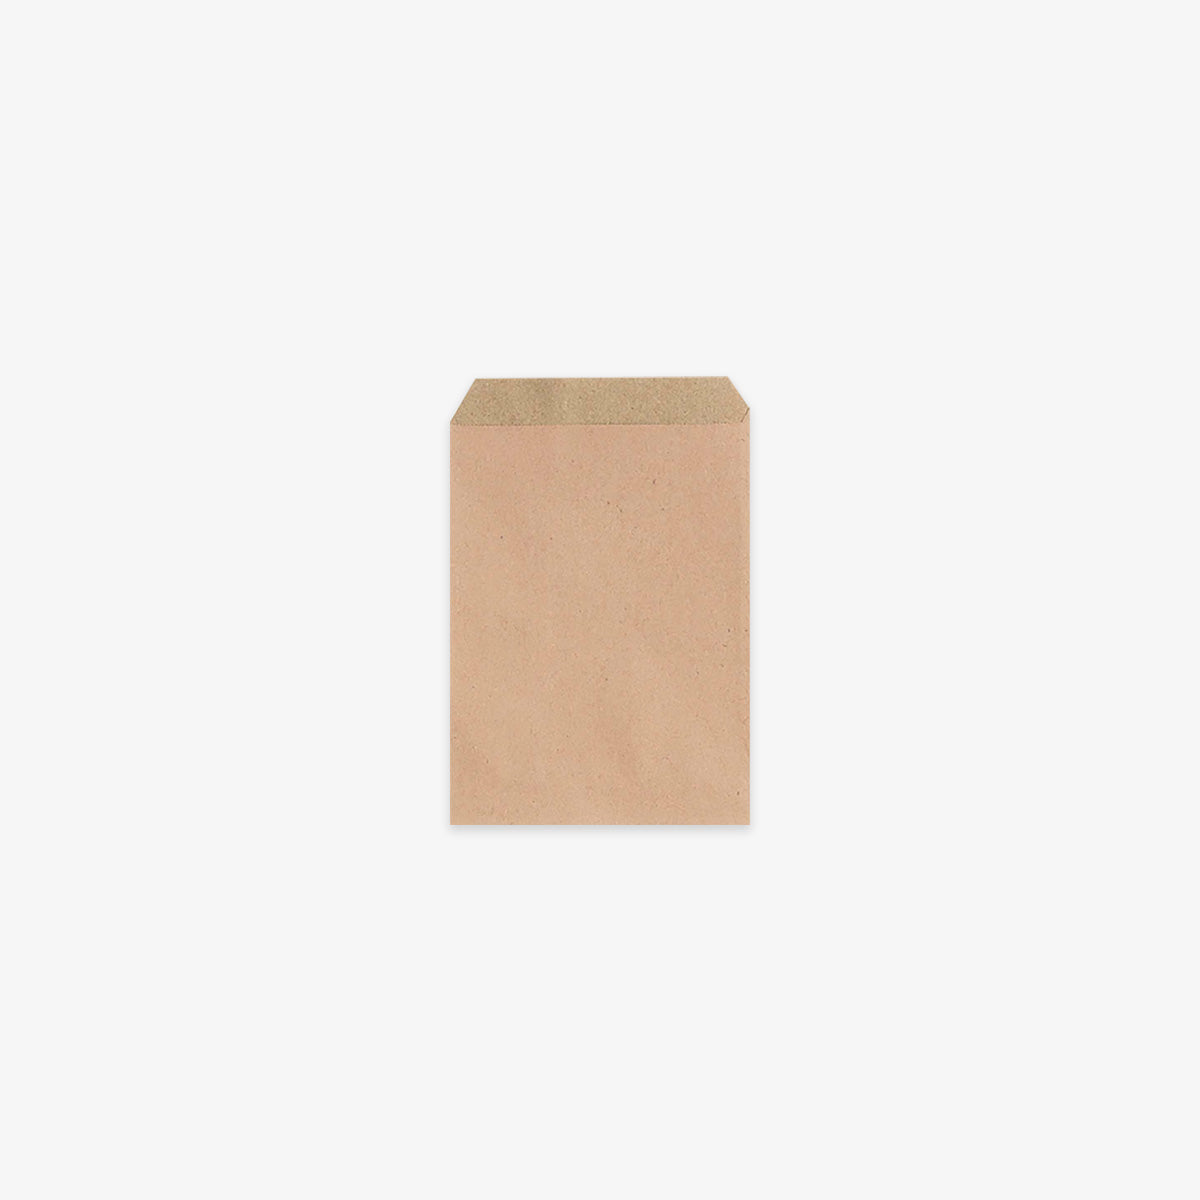 NUDE PAPER GIFT BAG // S